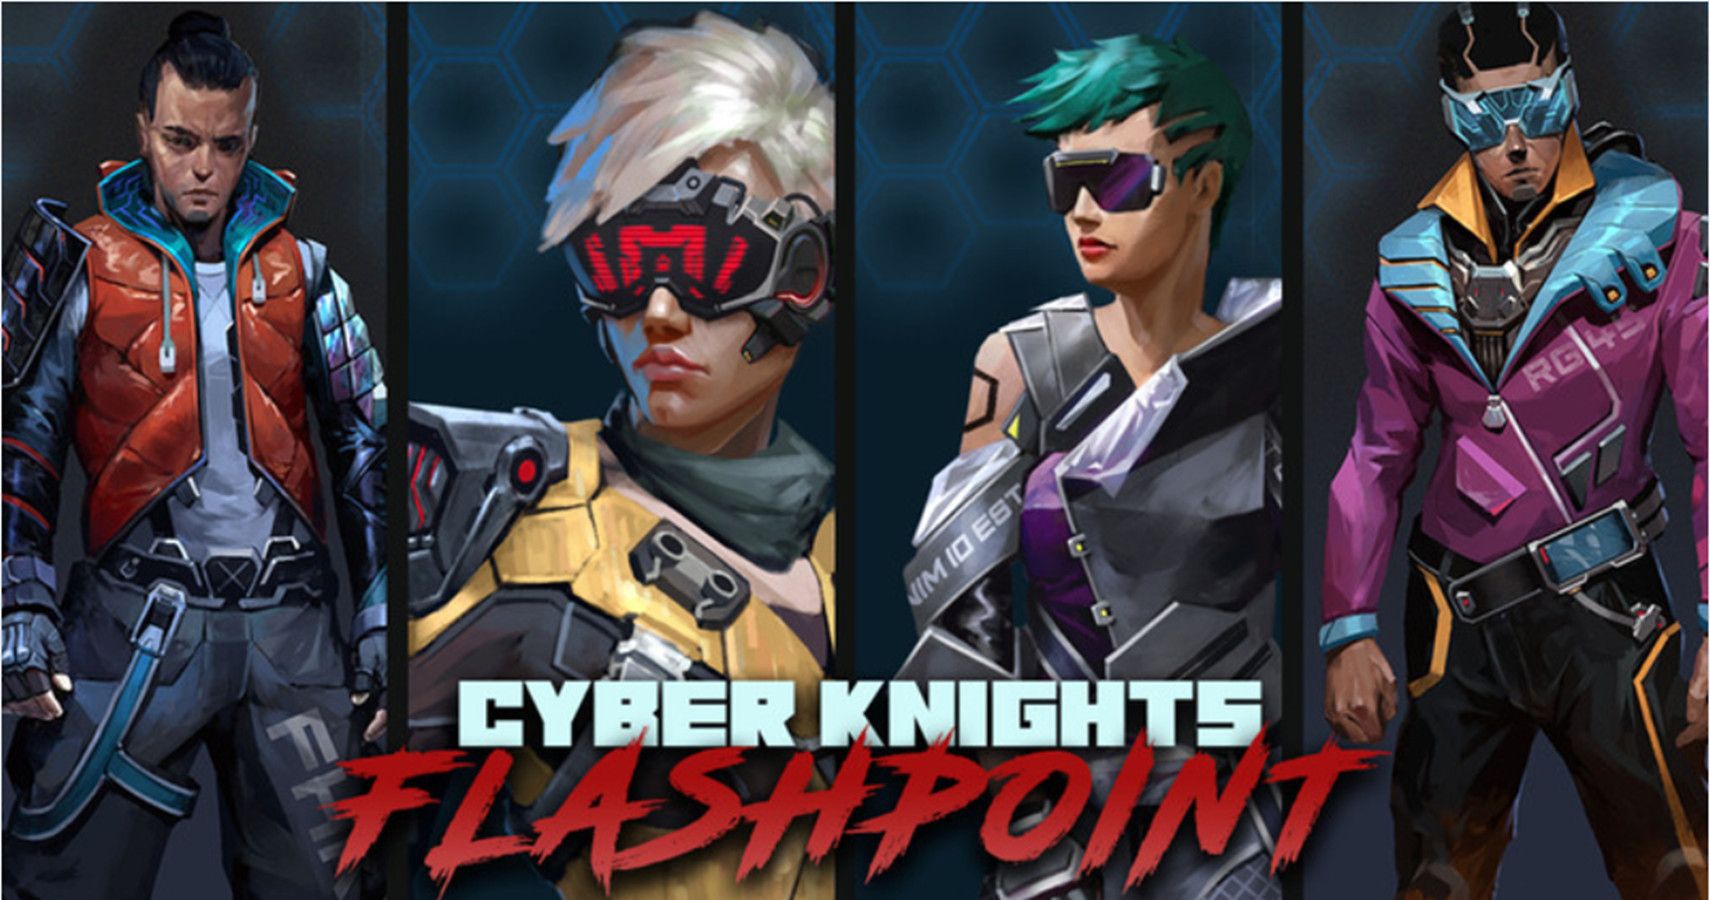 Cyber Knights Flashpoint Gameplay Trailer feature image